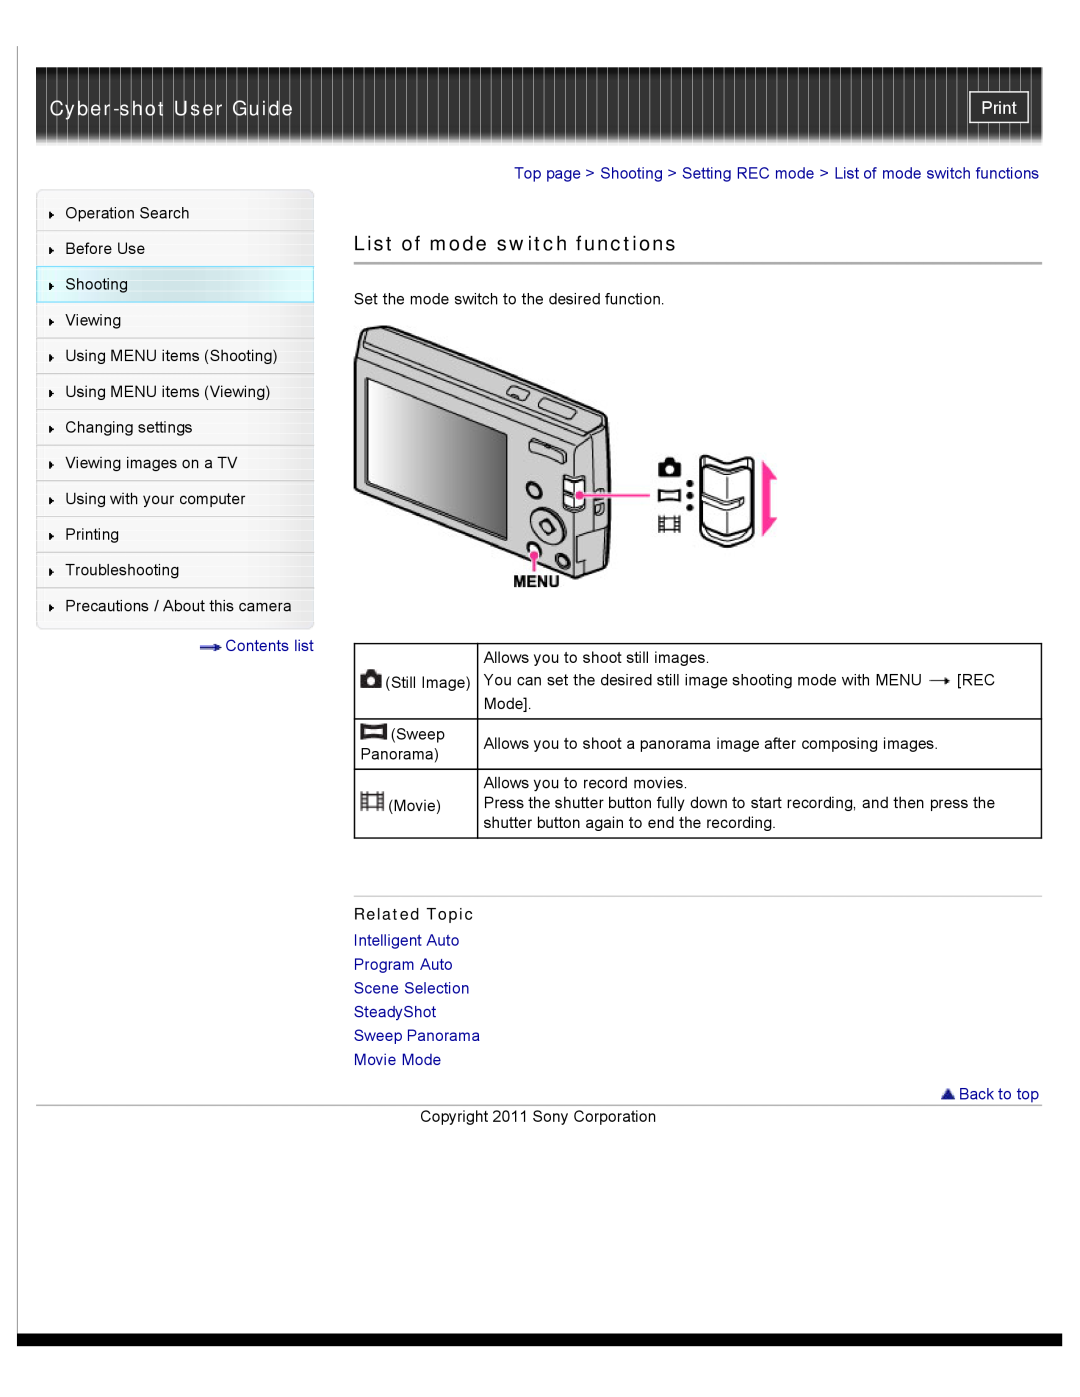 Sony DSC-W510 manual List of mode switch functions, Cyber-shot User Guide, Print, Contents list, Related Topic 